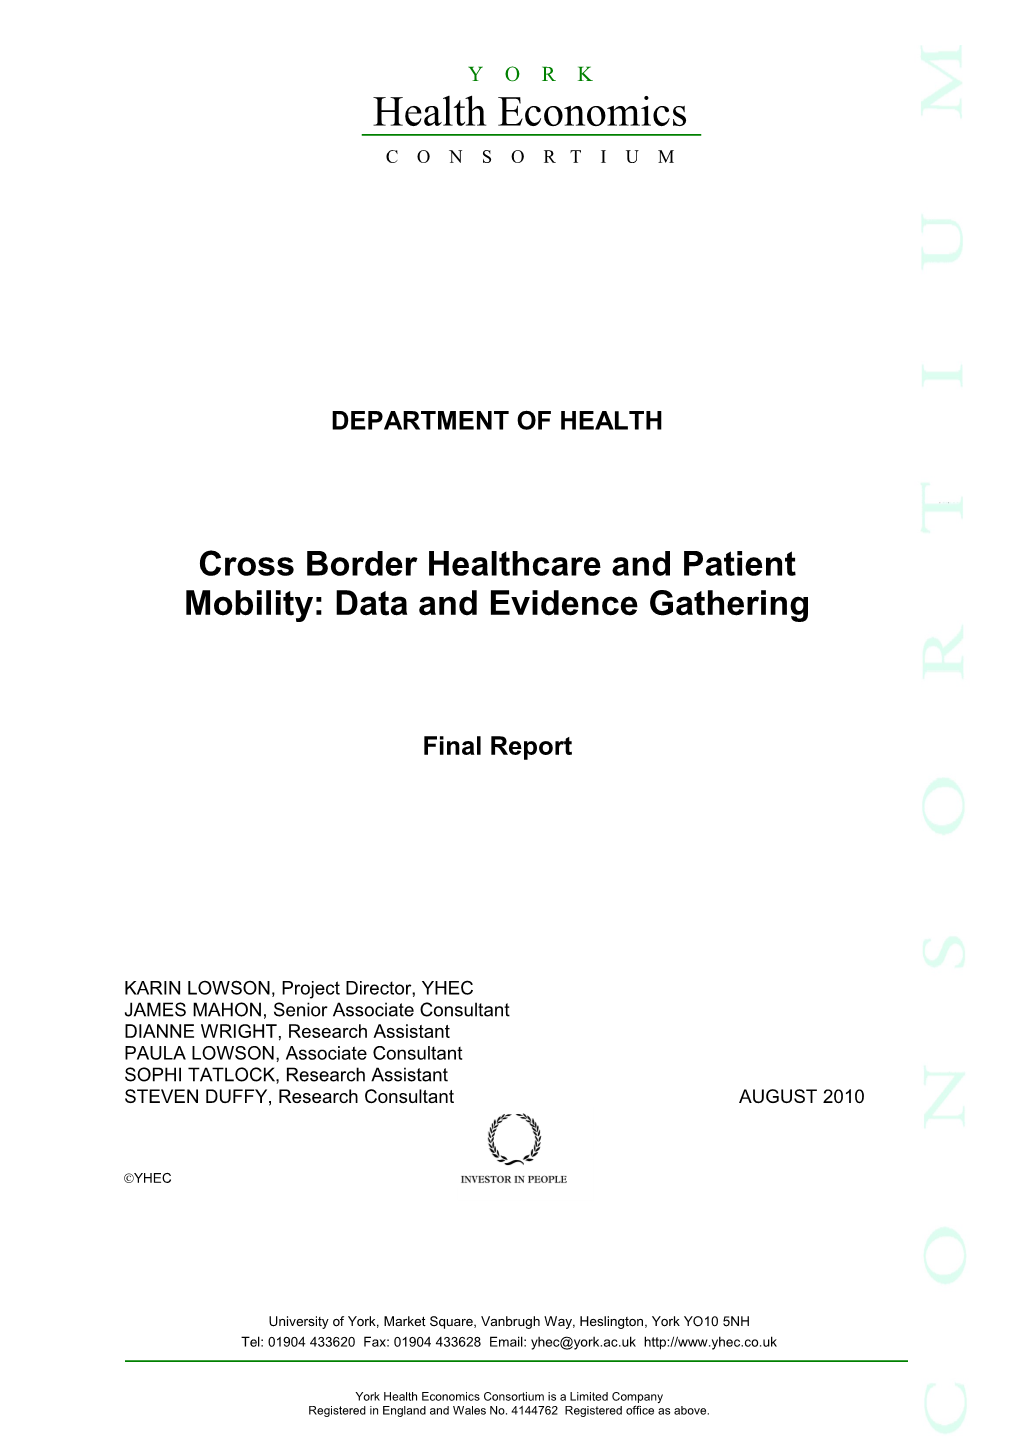 Cross Border Healthcare and Patient Mobility: Data and Evidence Gathering